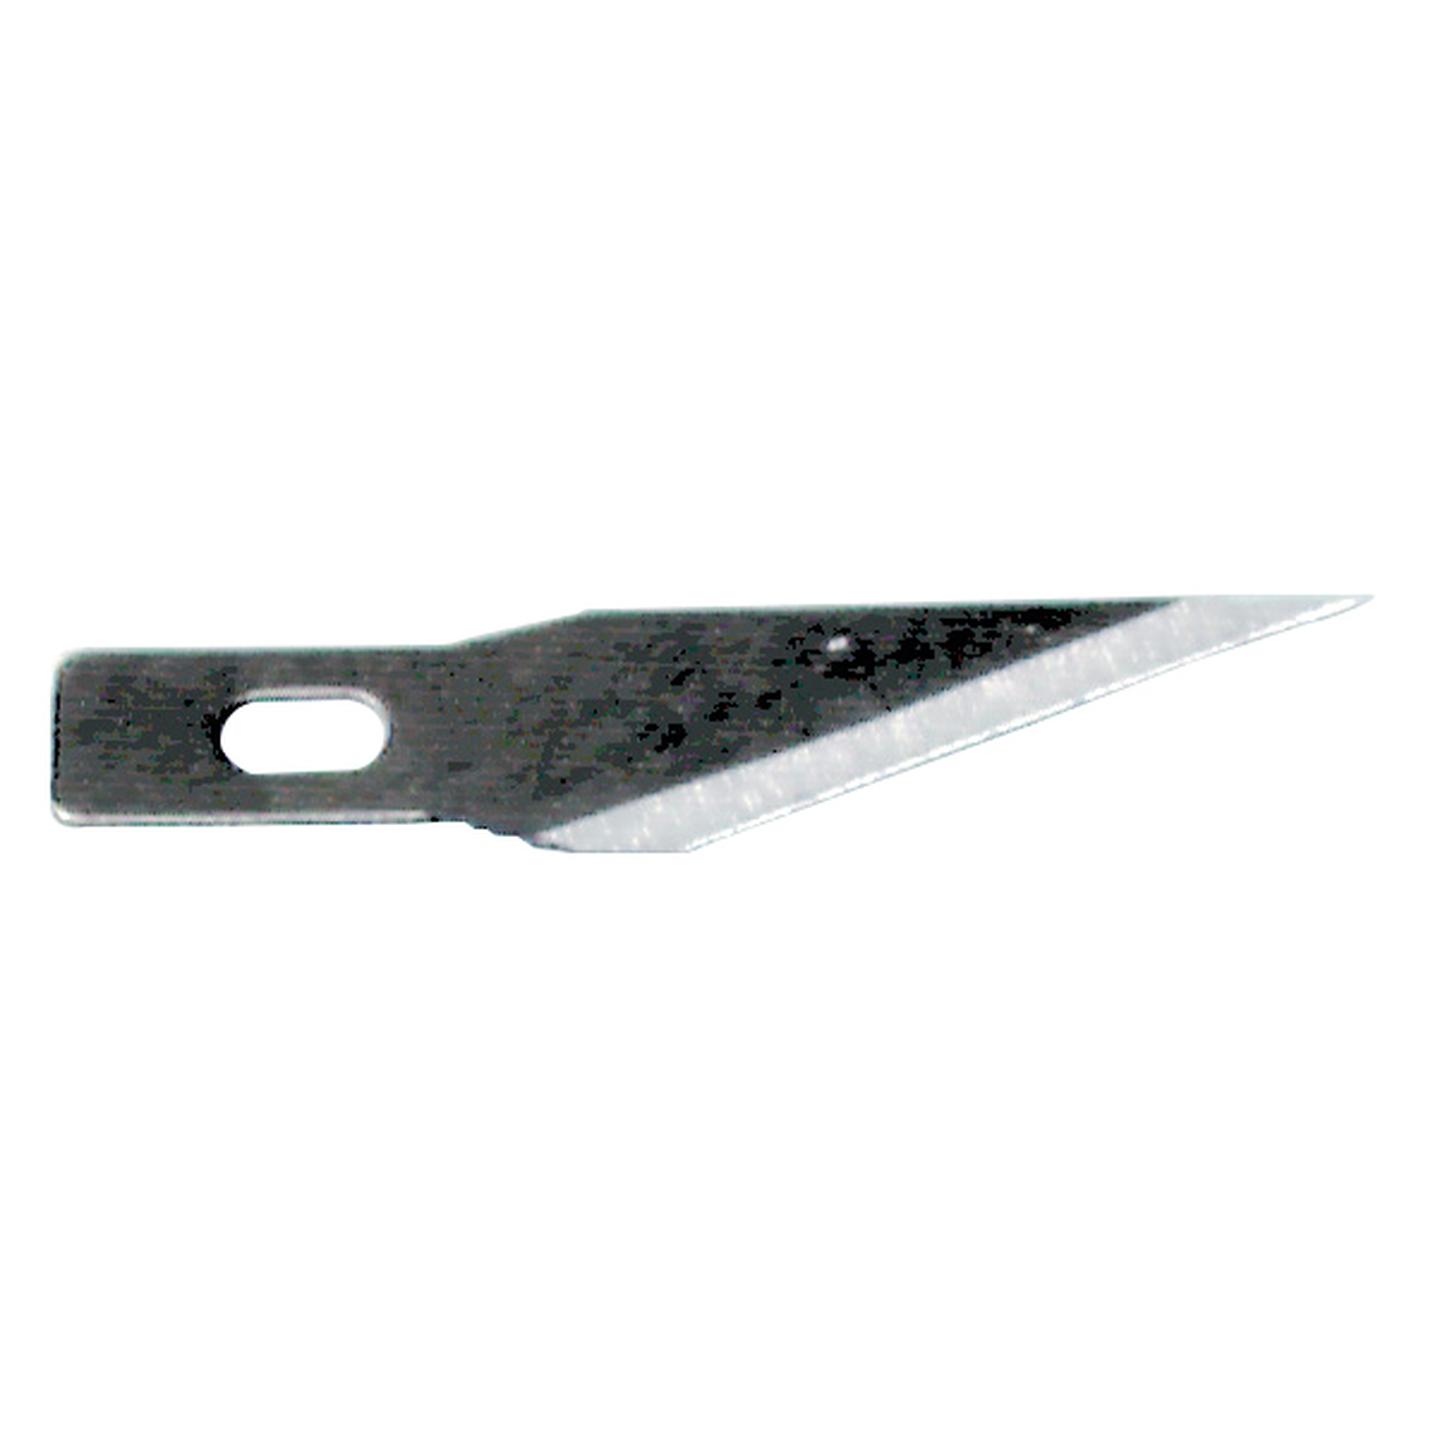 Artwork Knife Replacement Blades - Pk.5